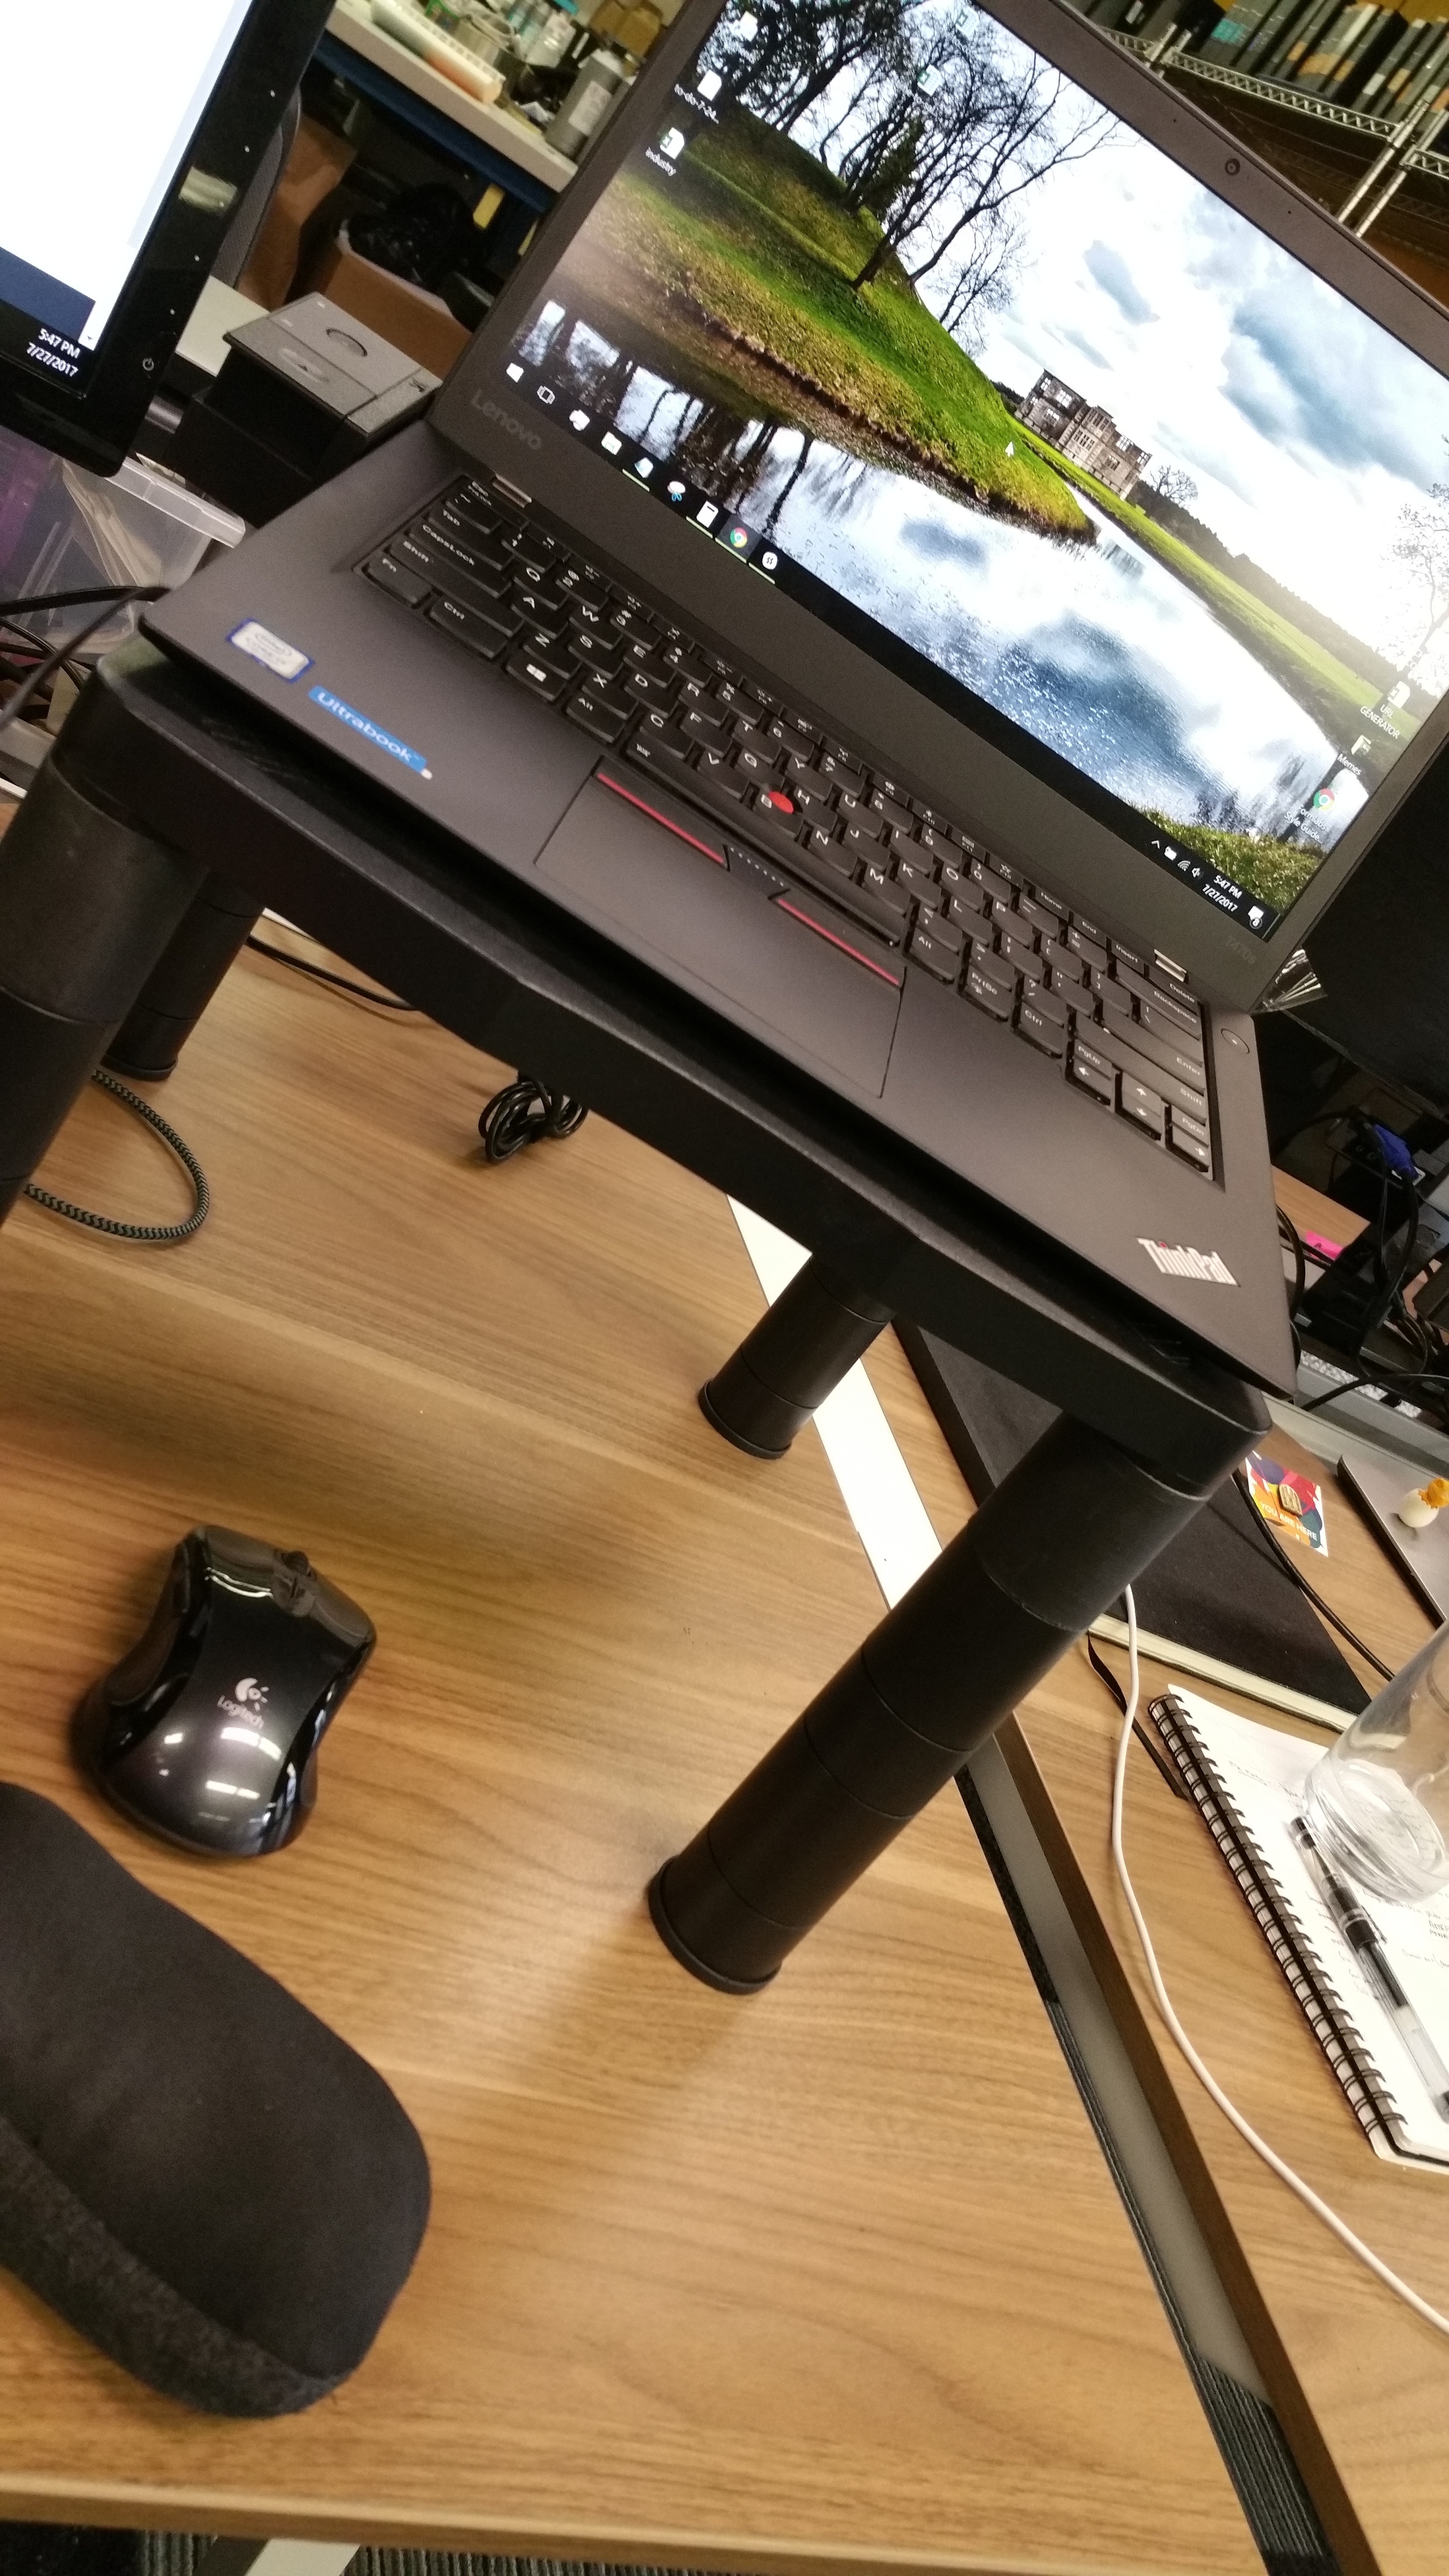  Halter Computer Desk Monitor Stand Riser with Height